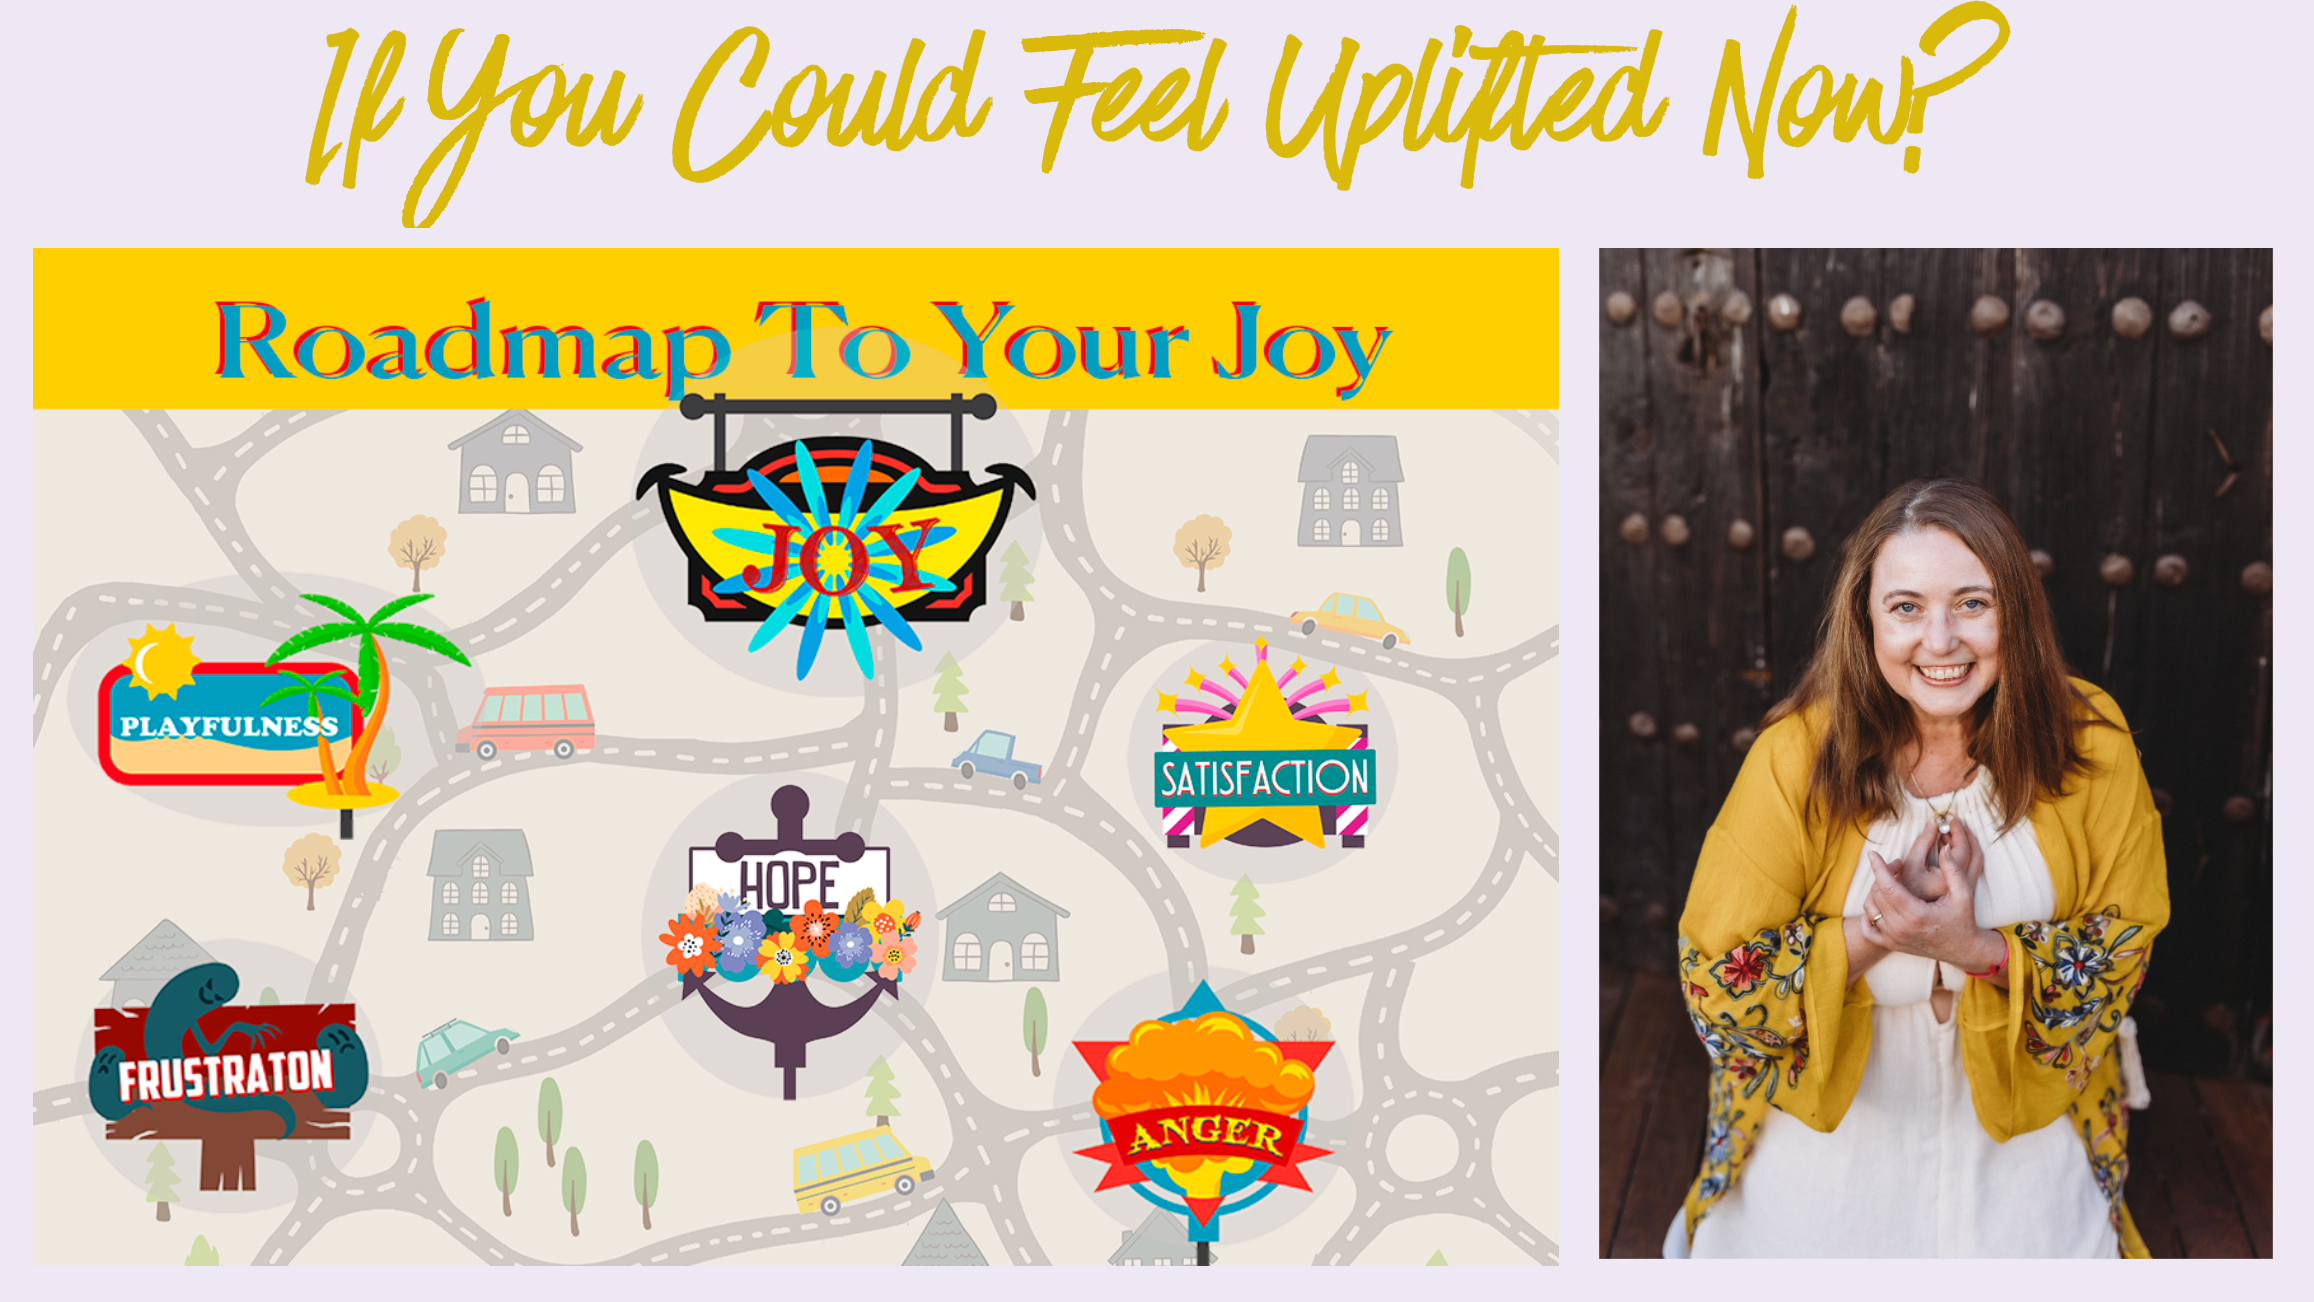 Joy Roadmap Positivity Community Teaches You Emotional Resilience For Happiness